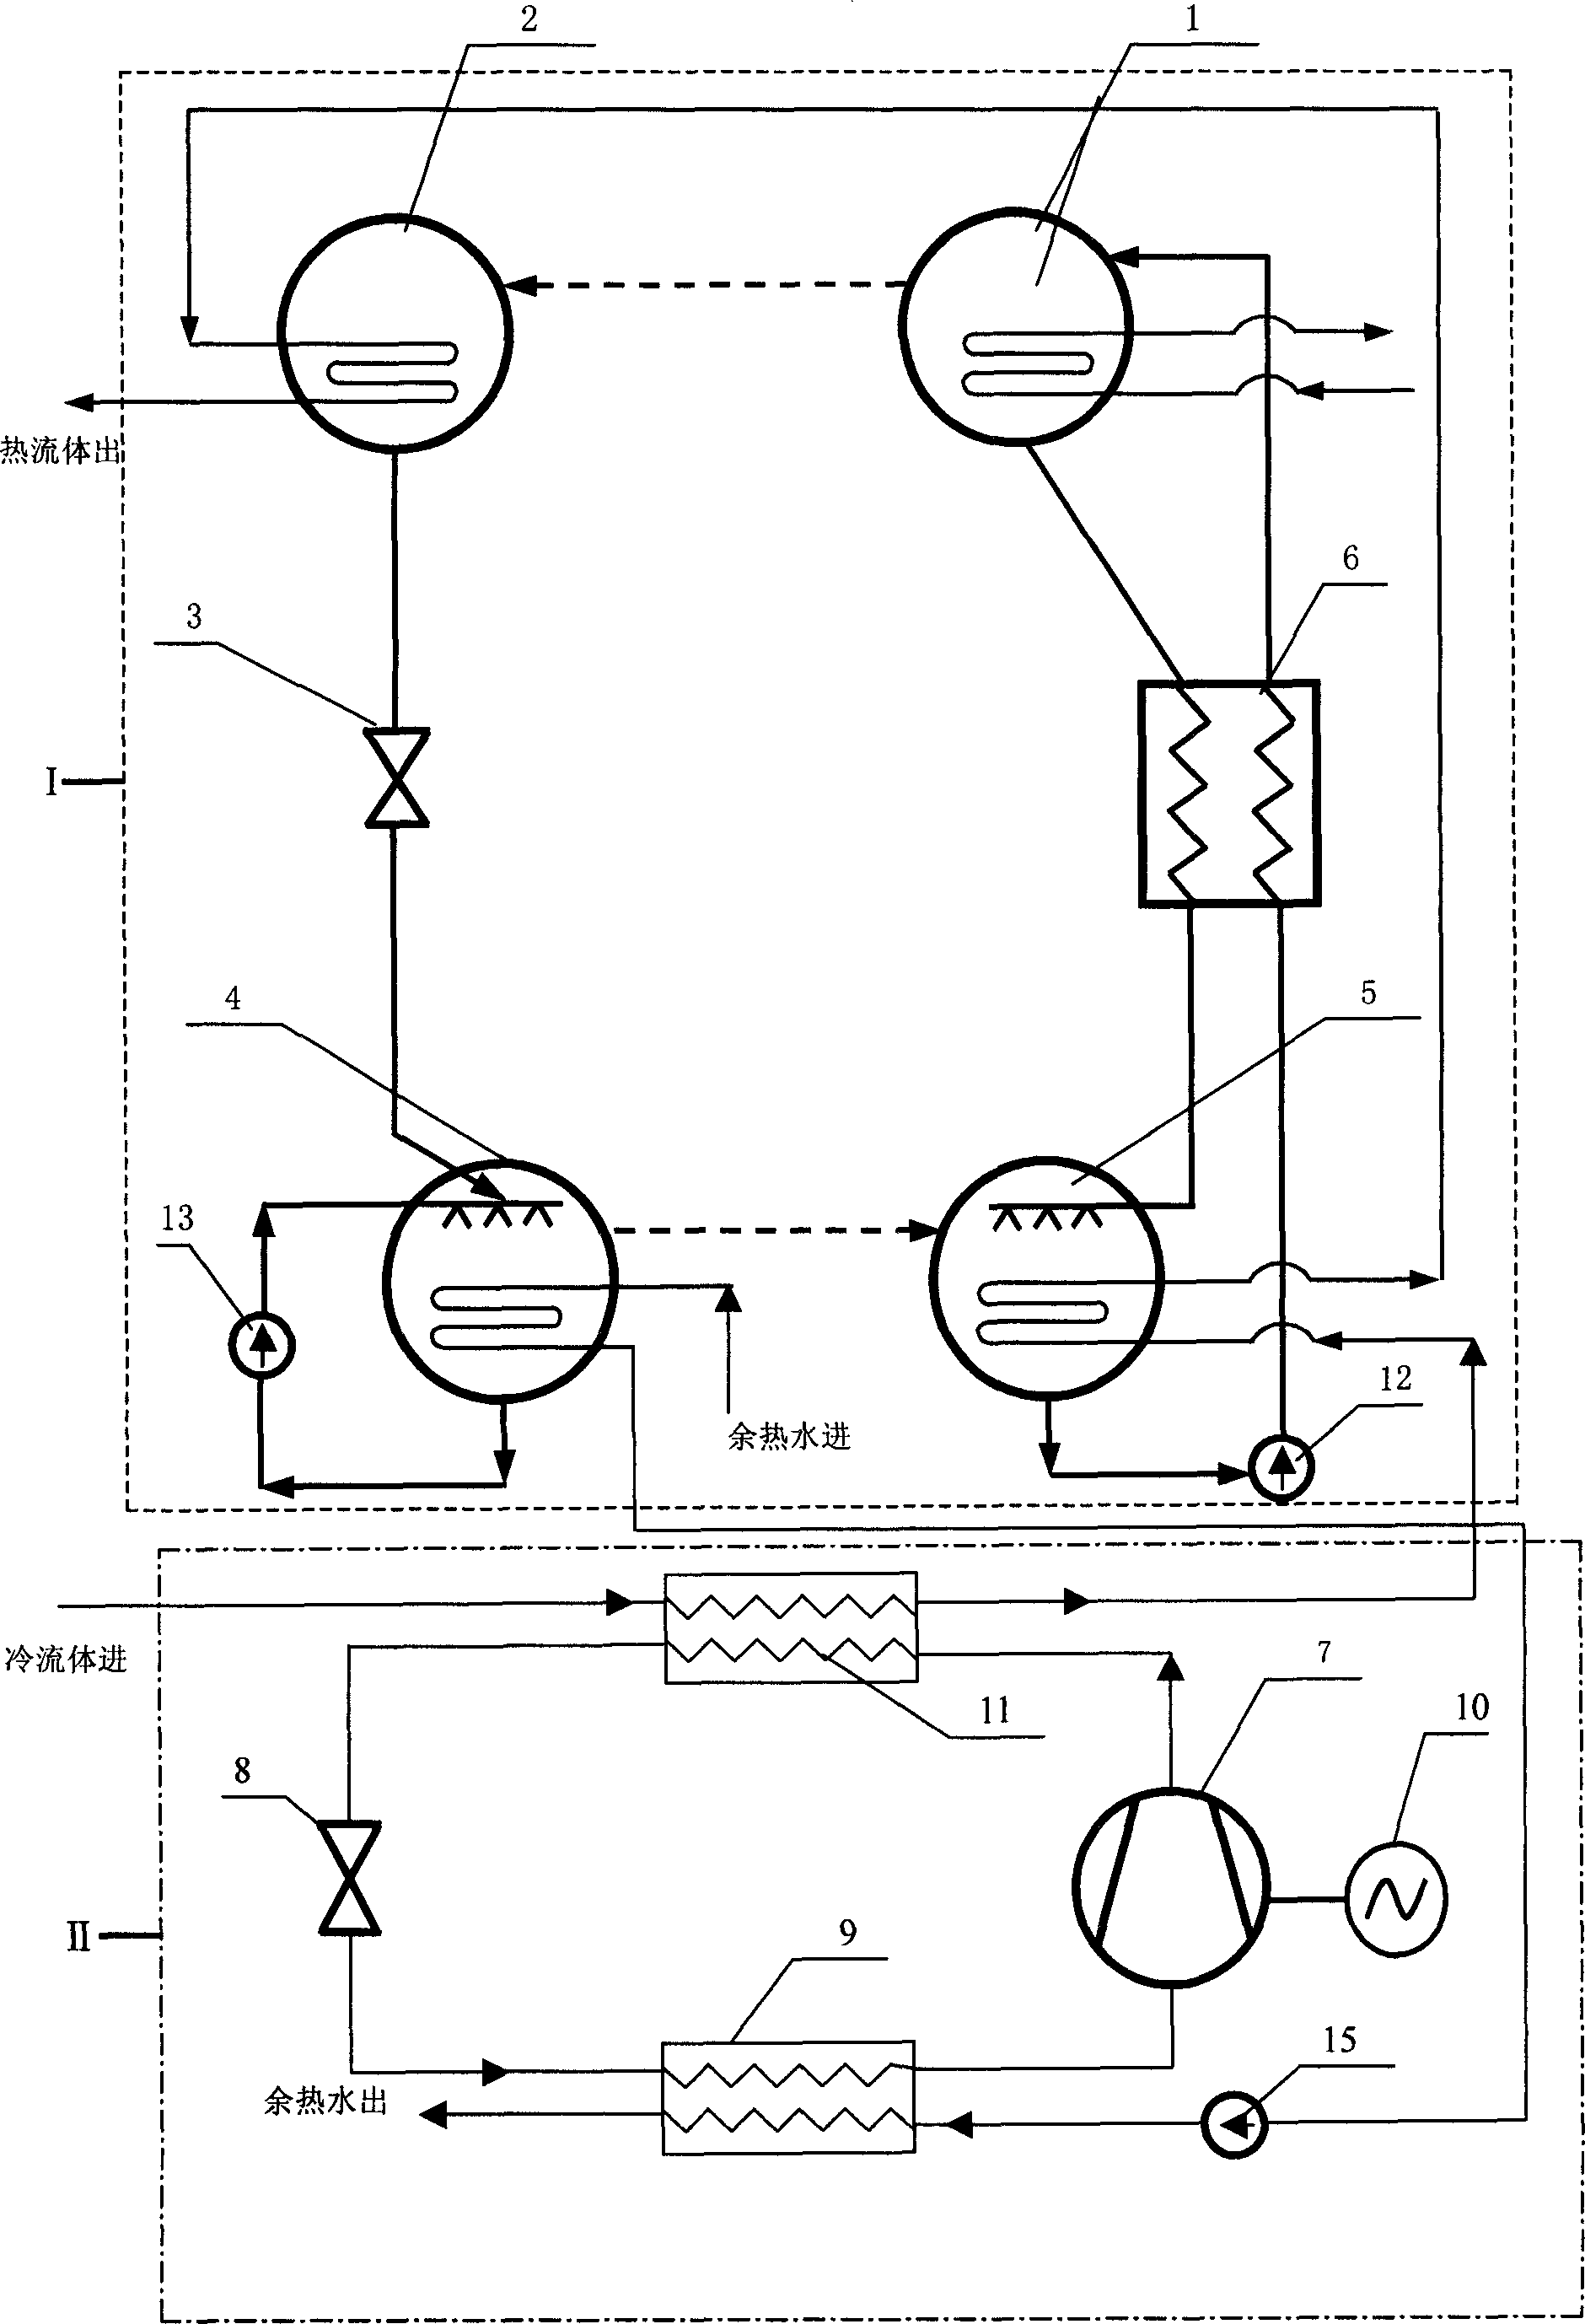 Compression-absorption combined heat pump heating system